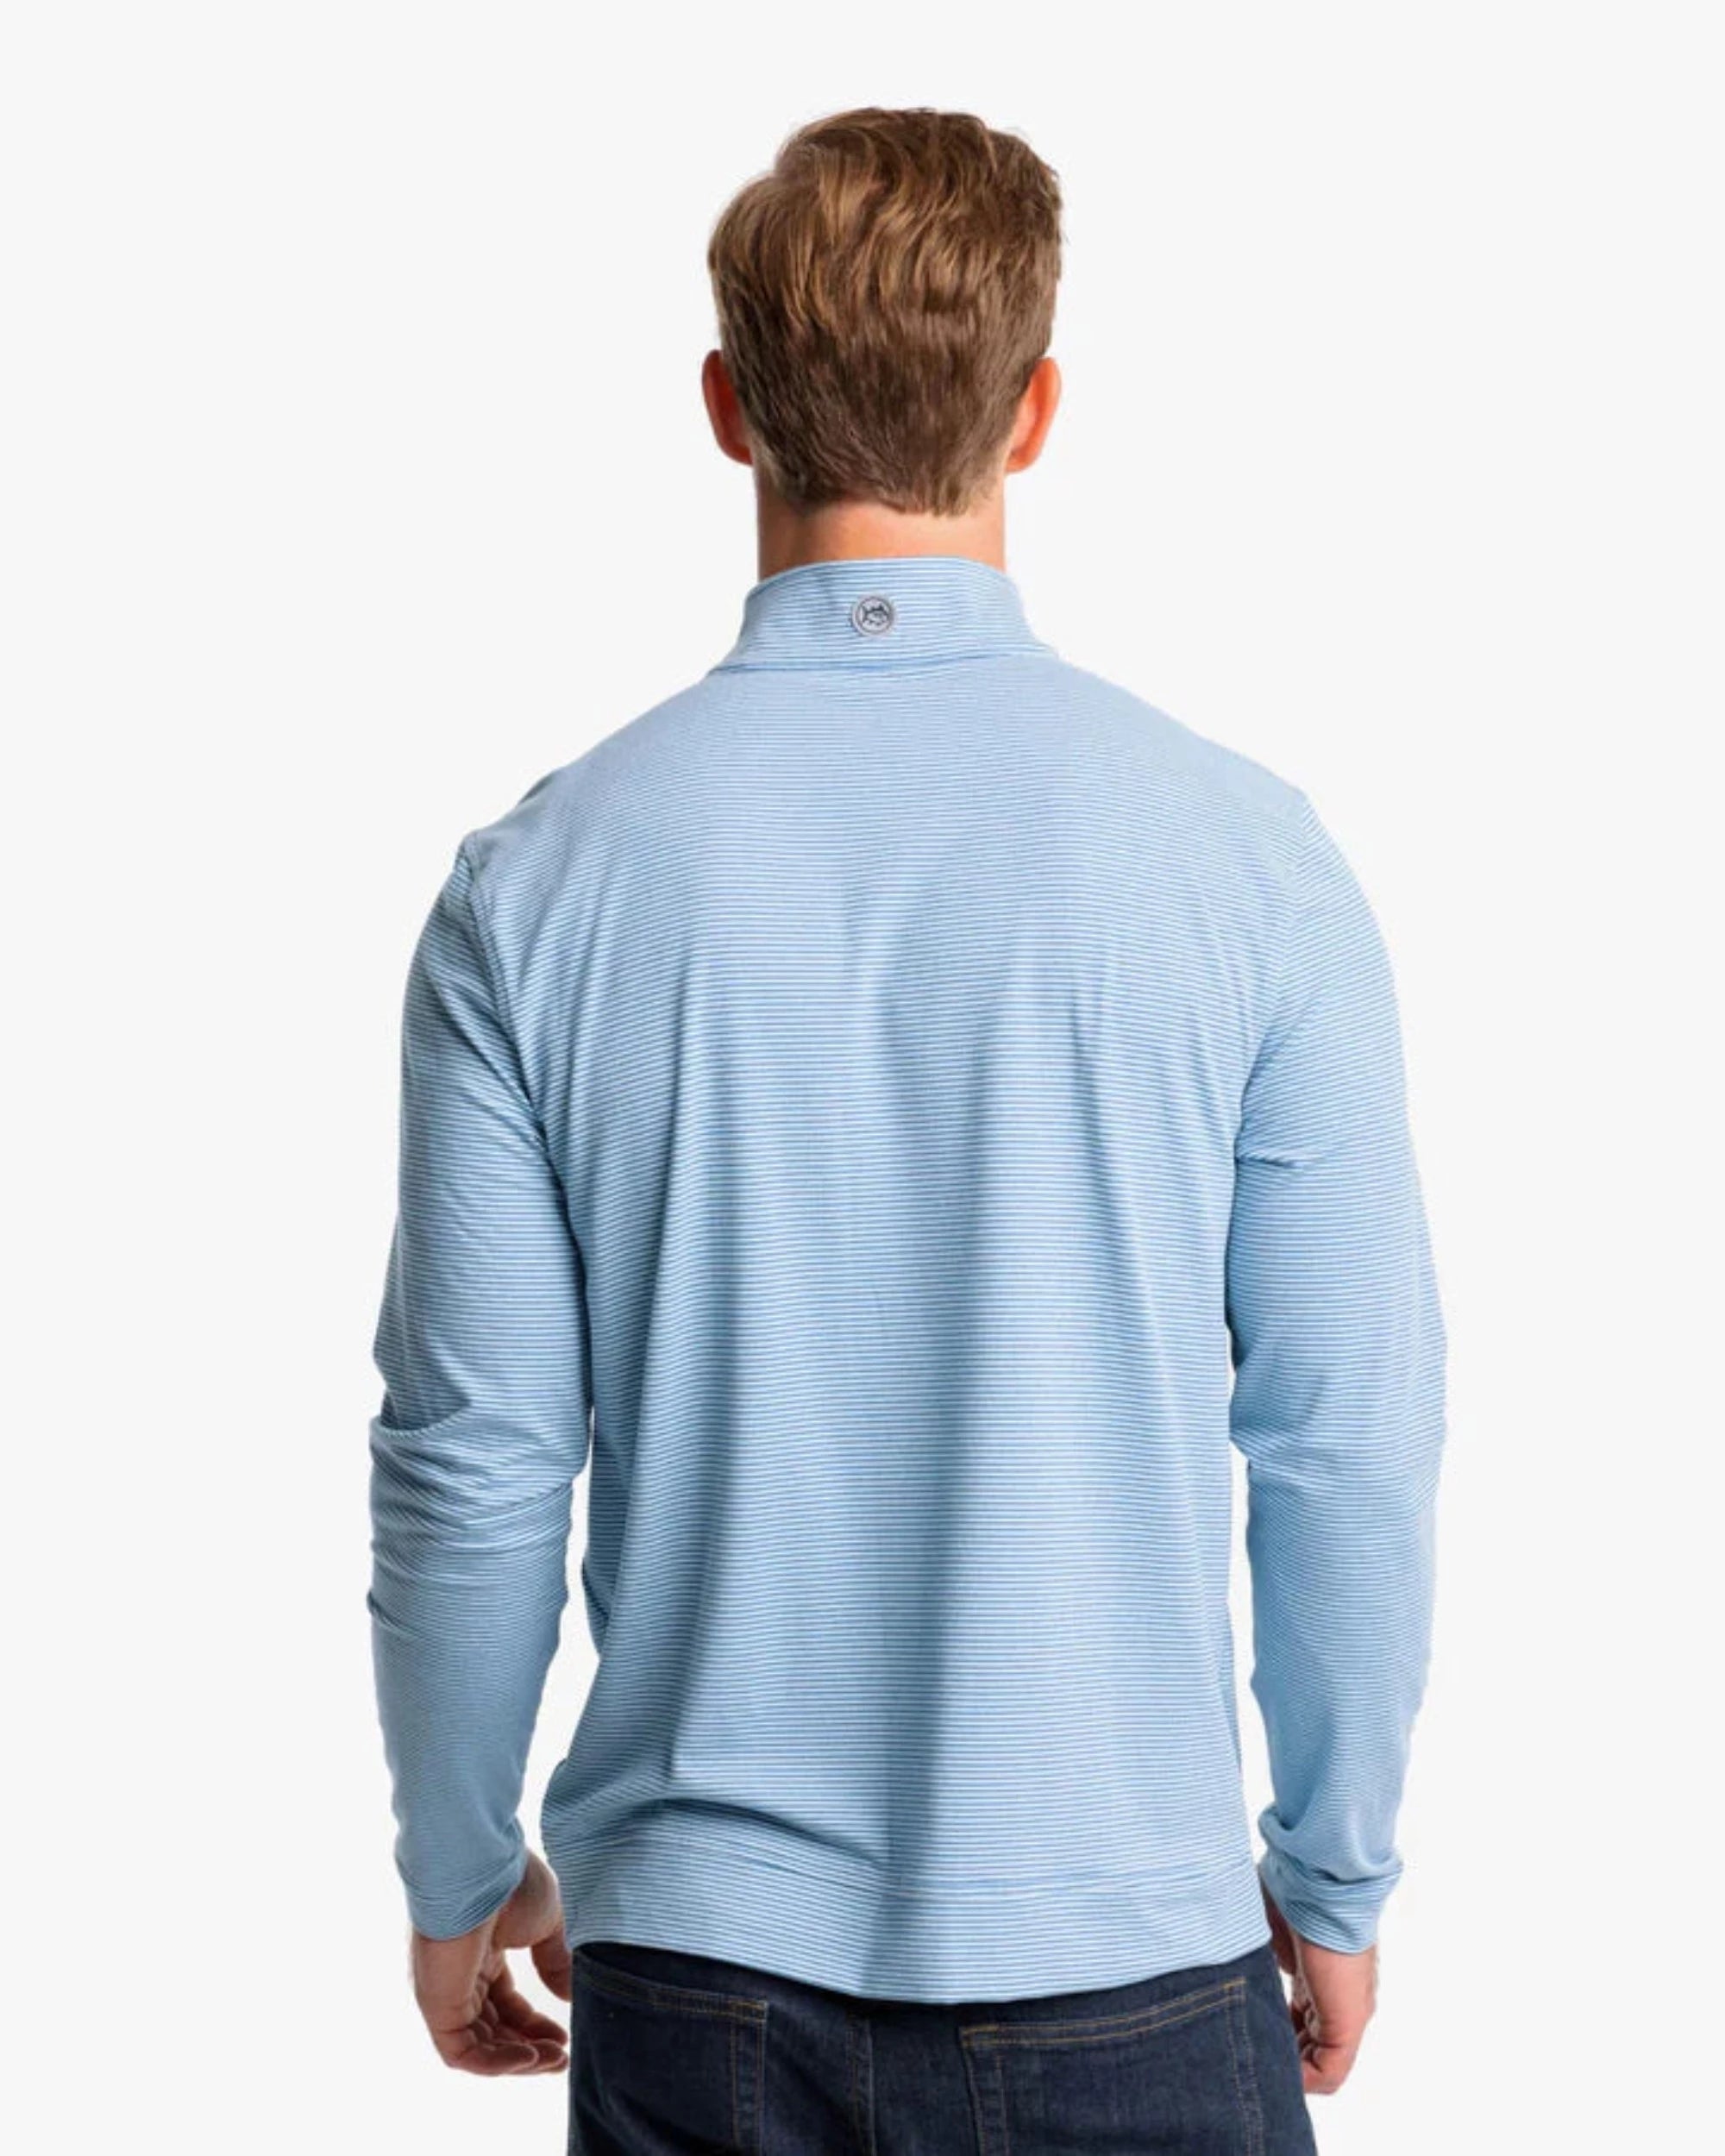 Southern Tide Scuttle Heather Performance Quarter Zip Hoodie